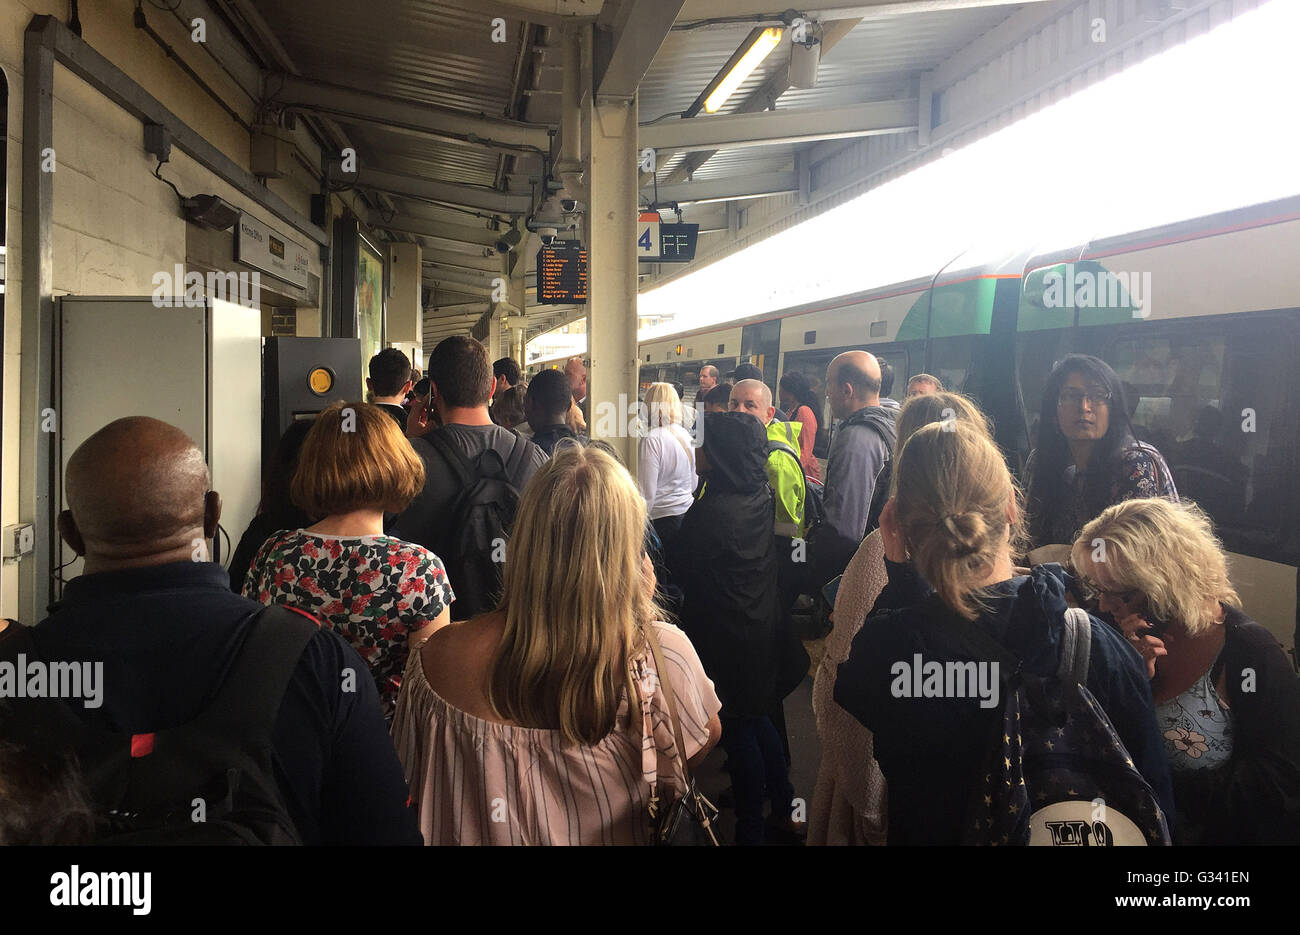 Stranded passengers at at West Croydon train station after trains were cancelled because of flooding in Sutton, as flash flooding has seen people rescued from submerged cars and hundreds of calls made to emergency services as torrential rain and thunderstorms batter the UK. Stock Photo